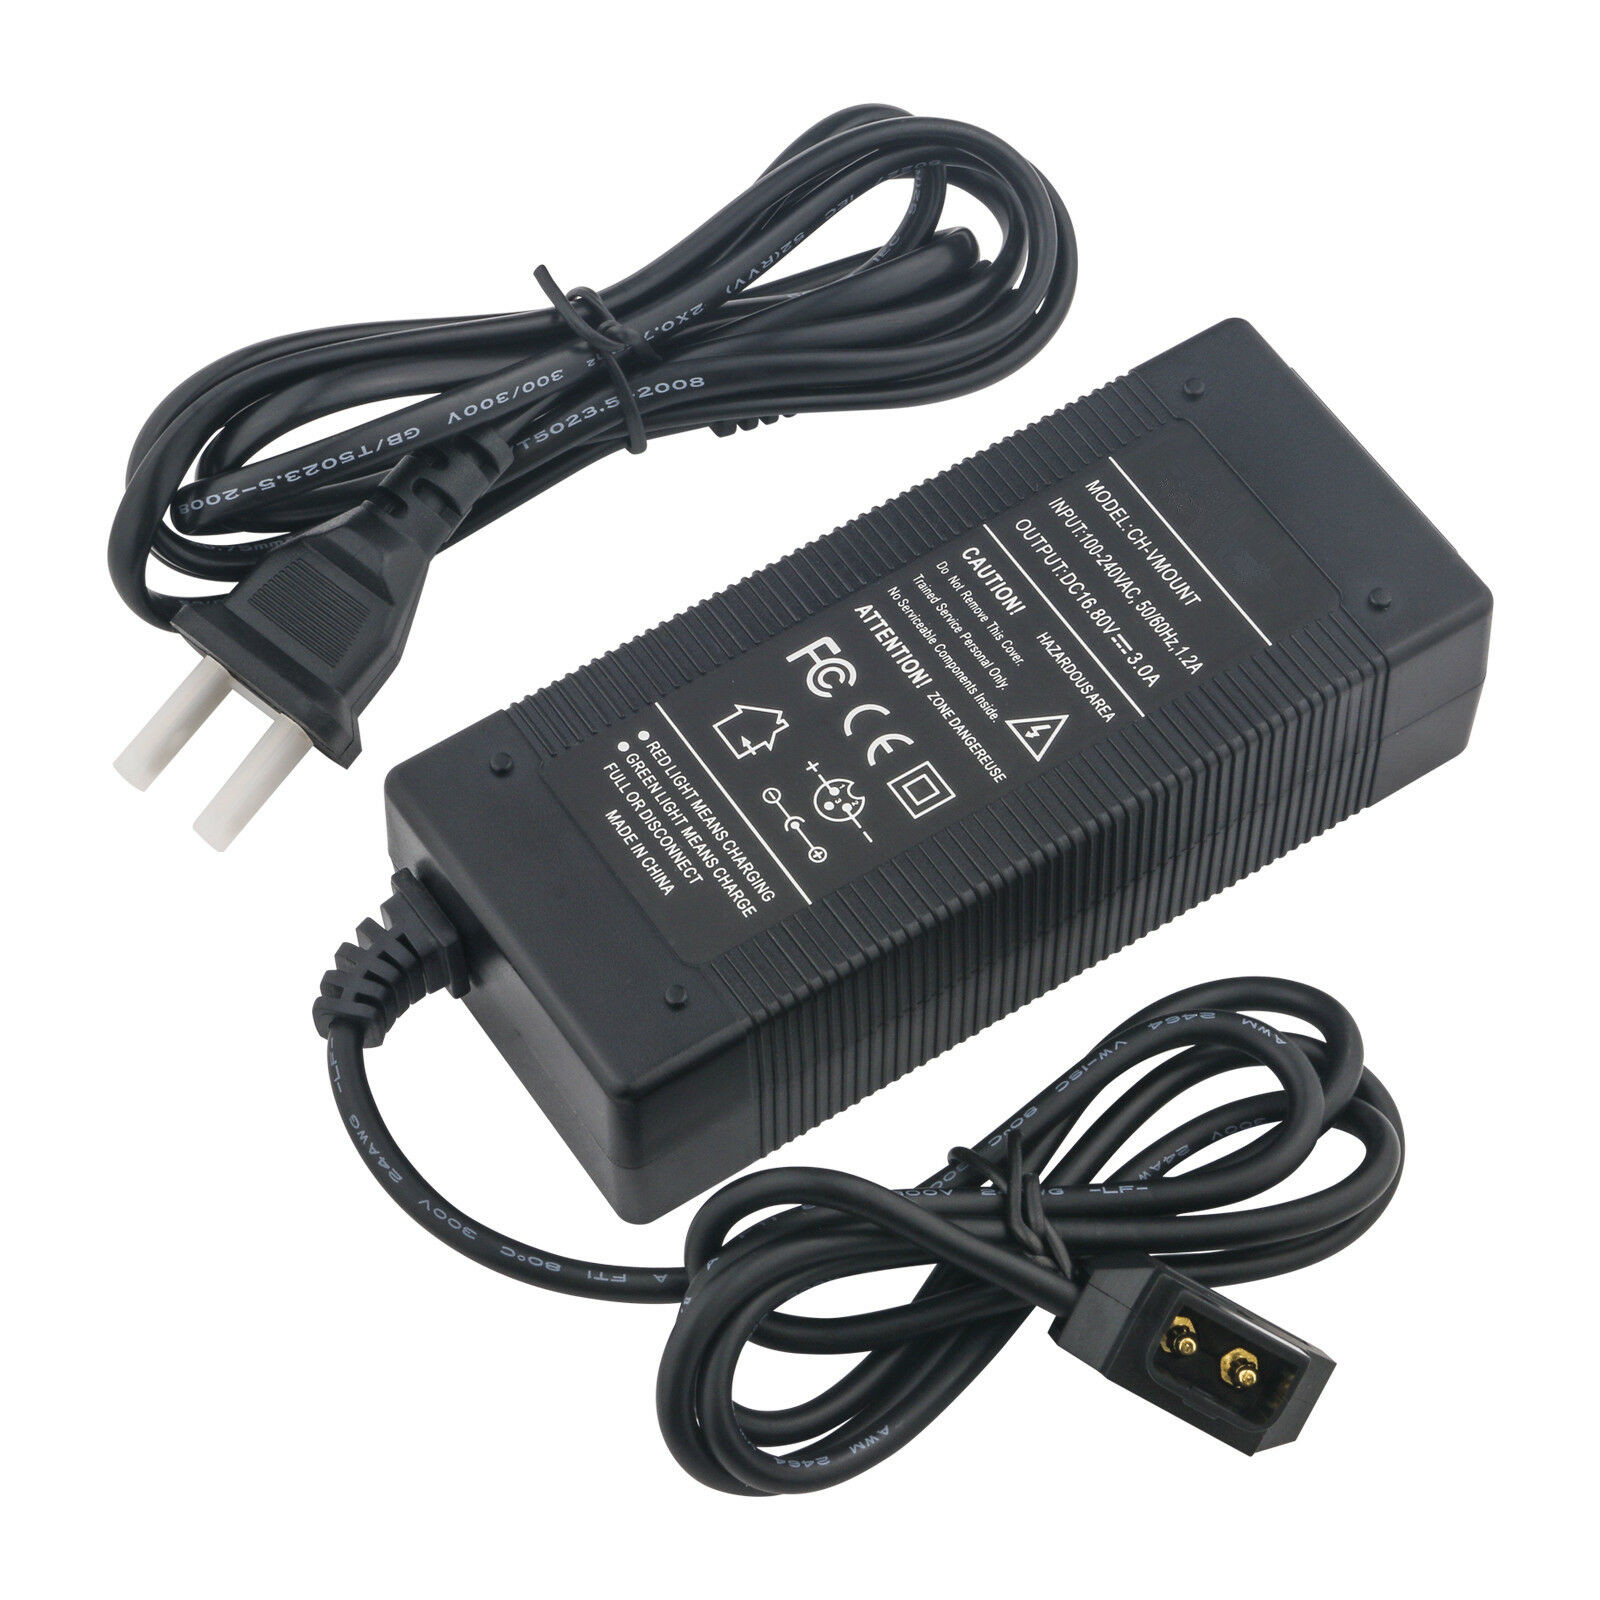 SONY PDW-530 battery charger